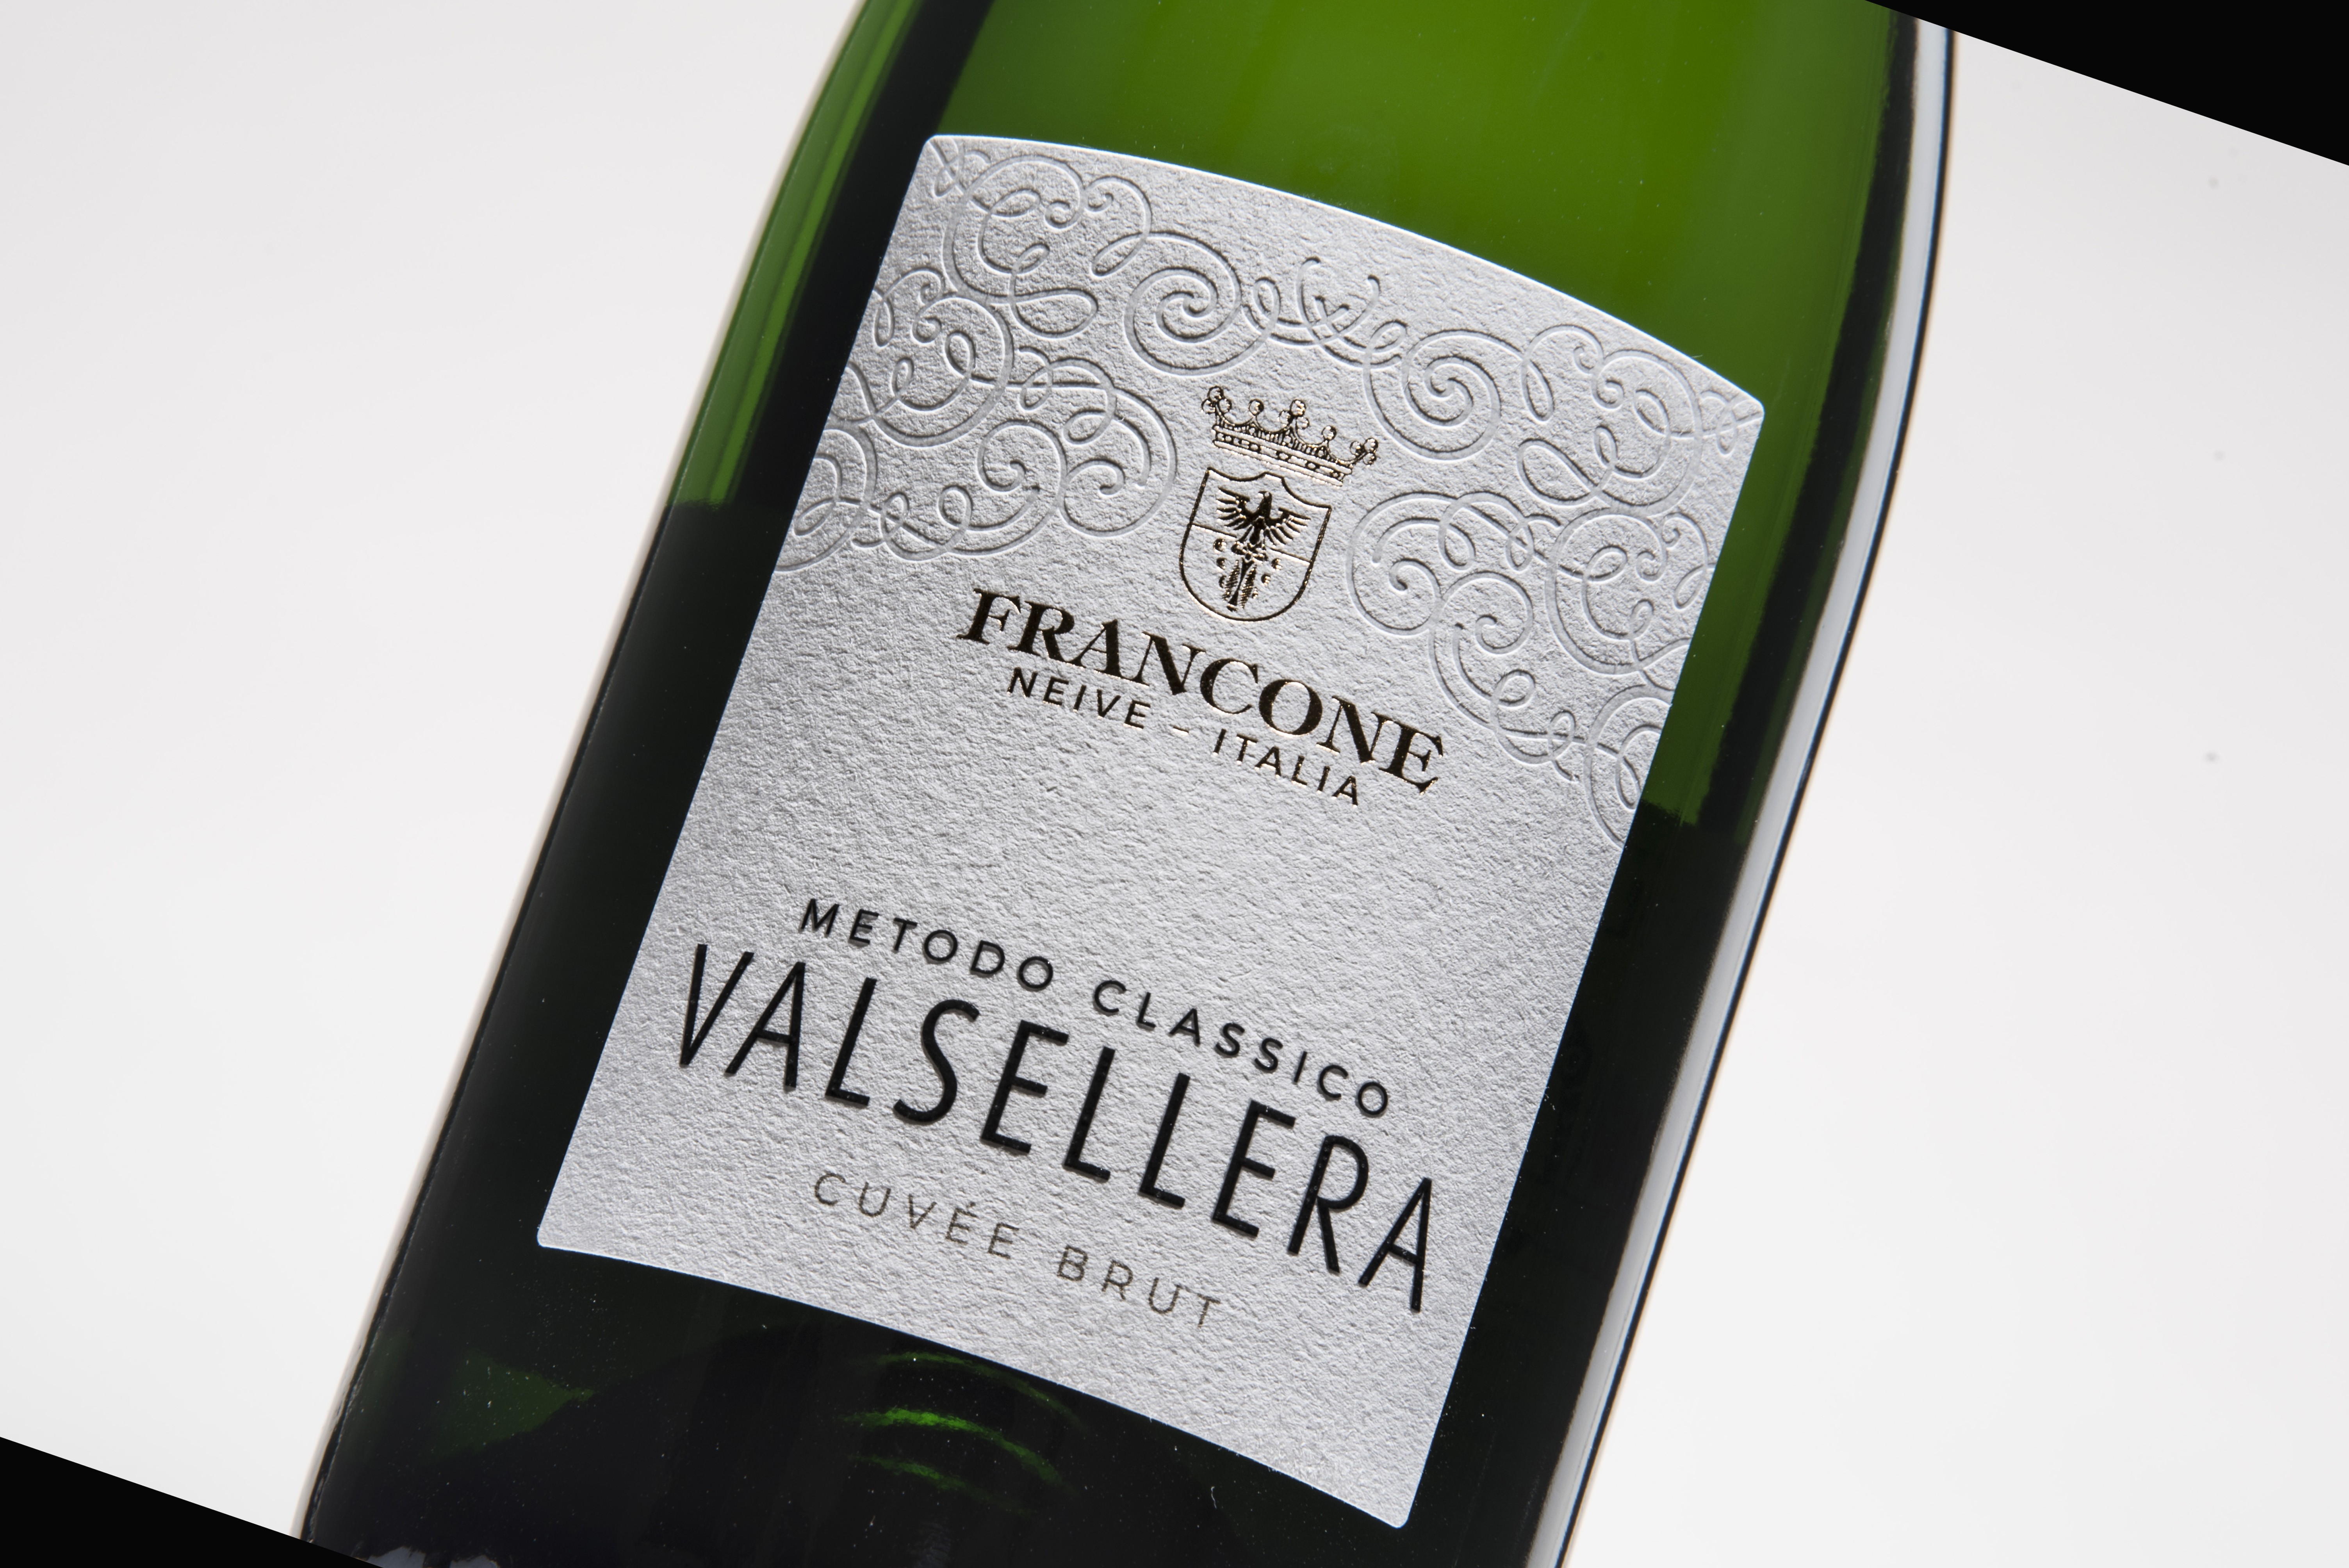 Valsellera: the 50th anniversary of one of the pioneer of Italian Bubbly